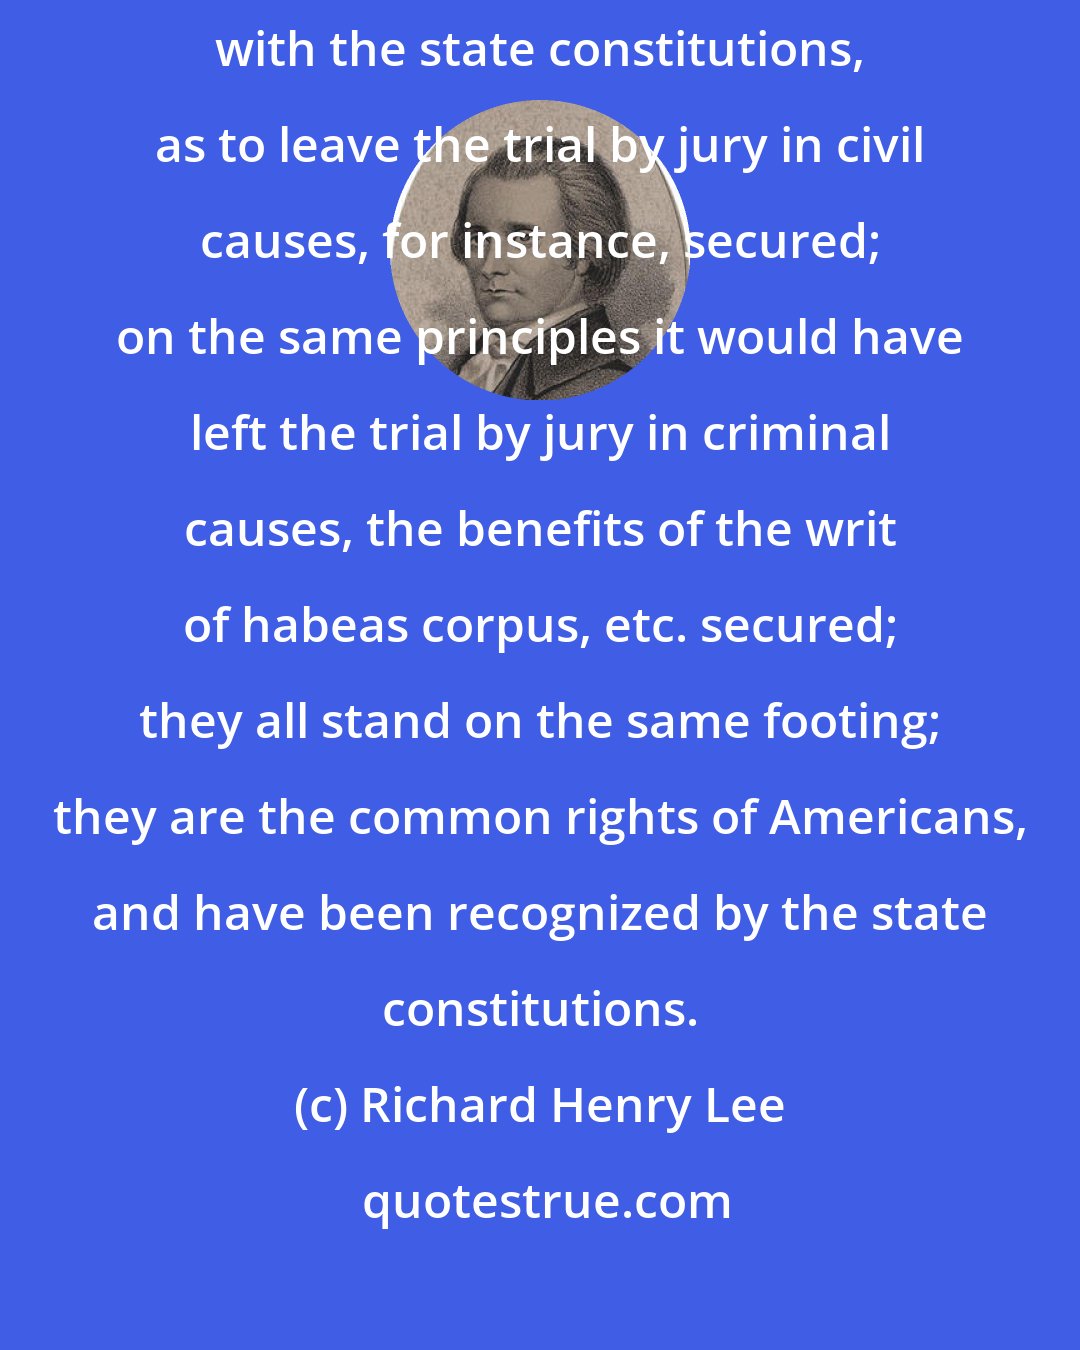 Richard Henry Lee: If the federal constitution is to be construed so far in connection with the state constitutions, as to leave the trial by jury in civil causes, for instance, secured; on the same principles it would have left the trial by jury in criminal causes, the benefits of the writ of habeas corpus, etc. secured; they all stand on the same footing; they are the common rights of Americans, and have been recognized by the state constitutions.